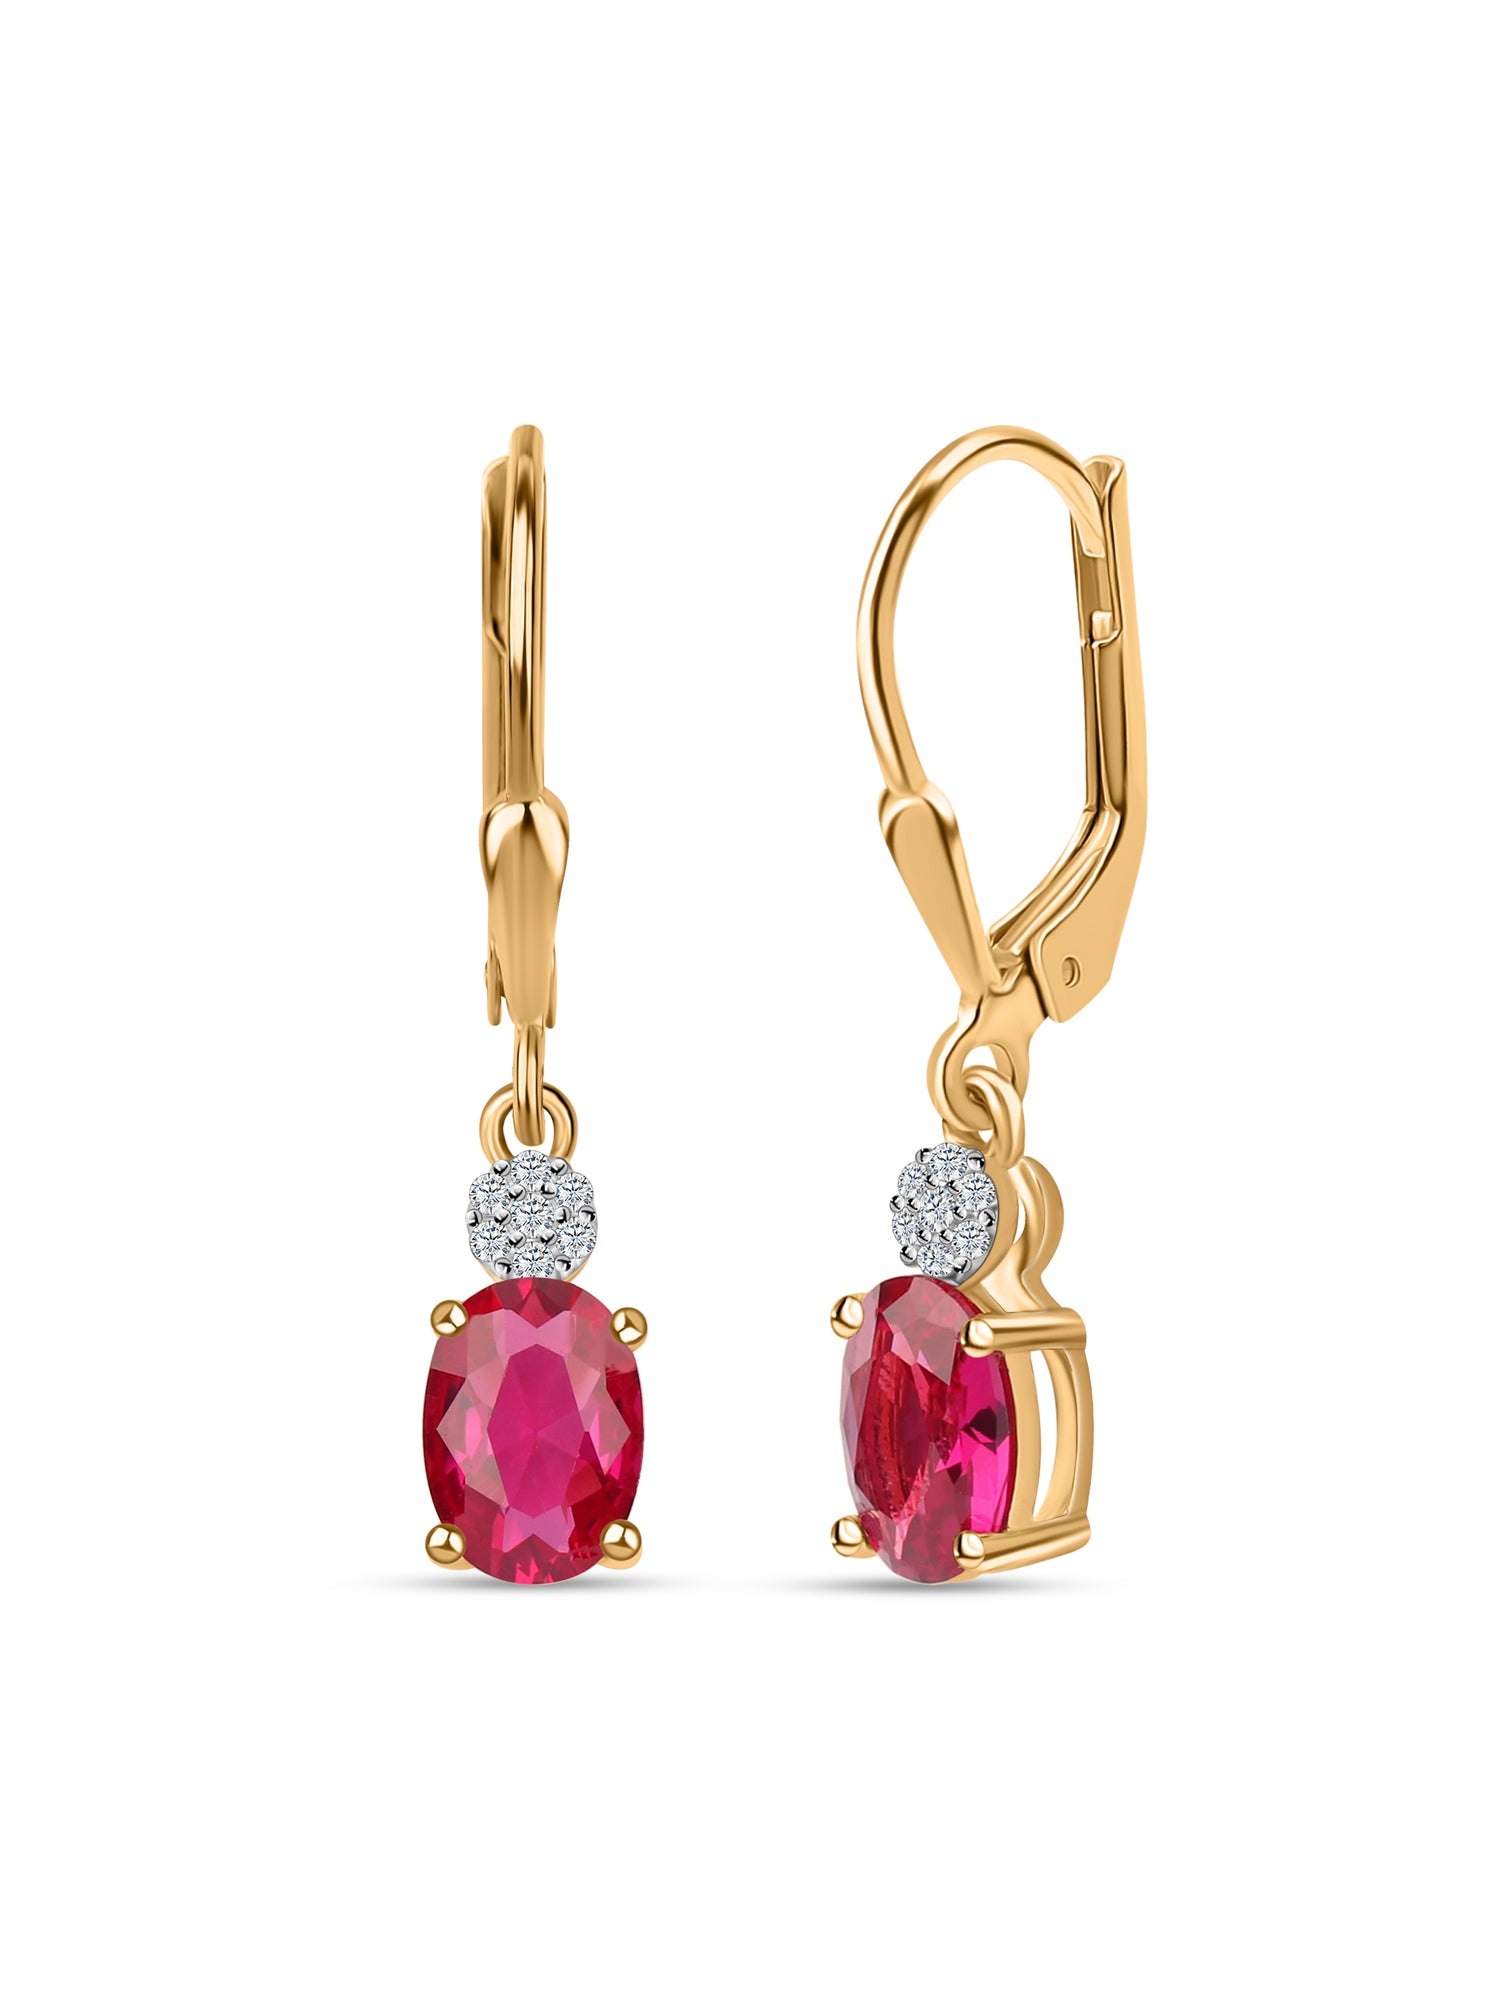 Red Ruby Classic Teardrop Earrings with Lever Back